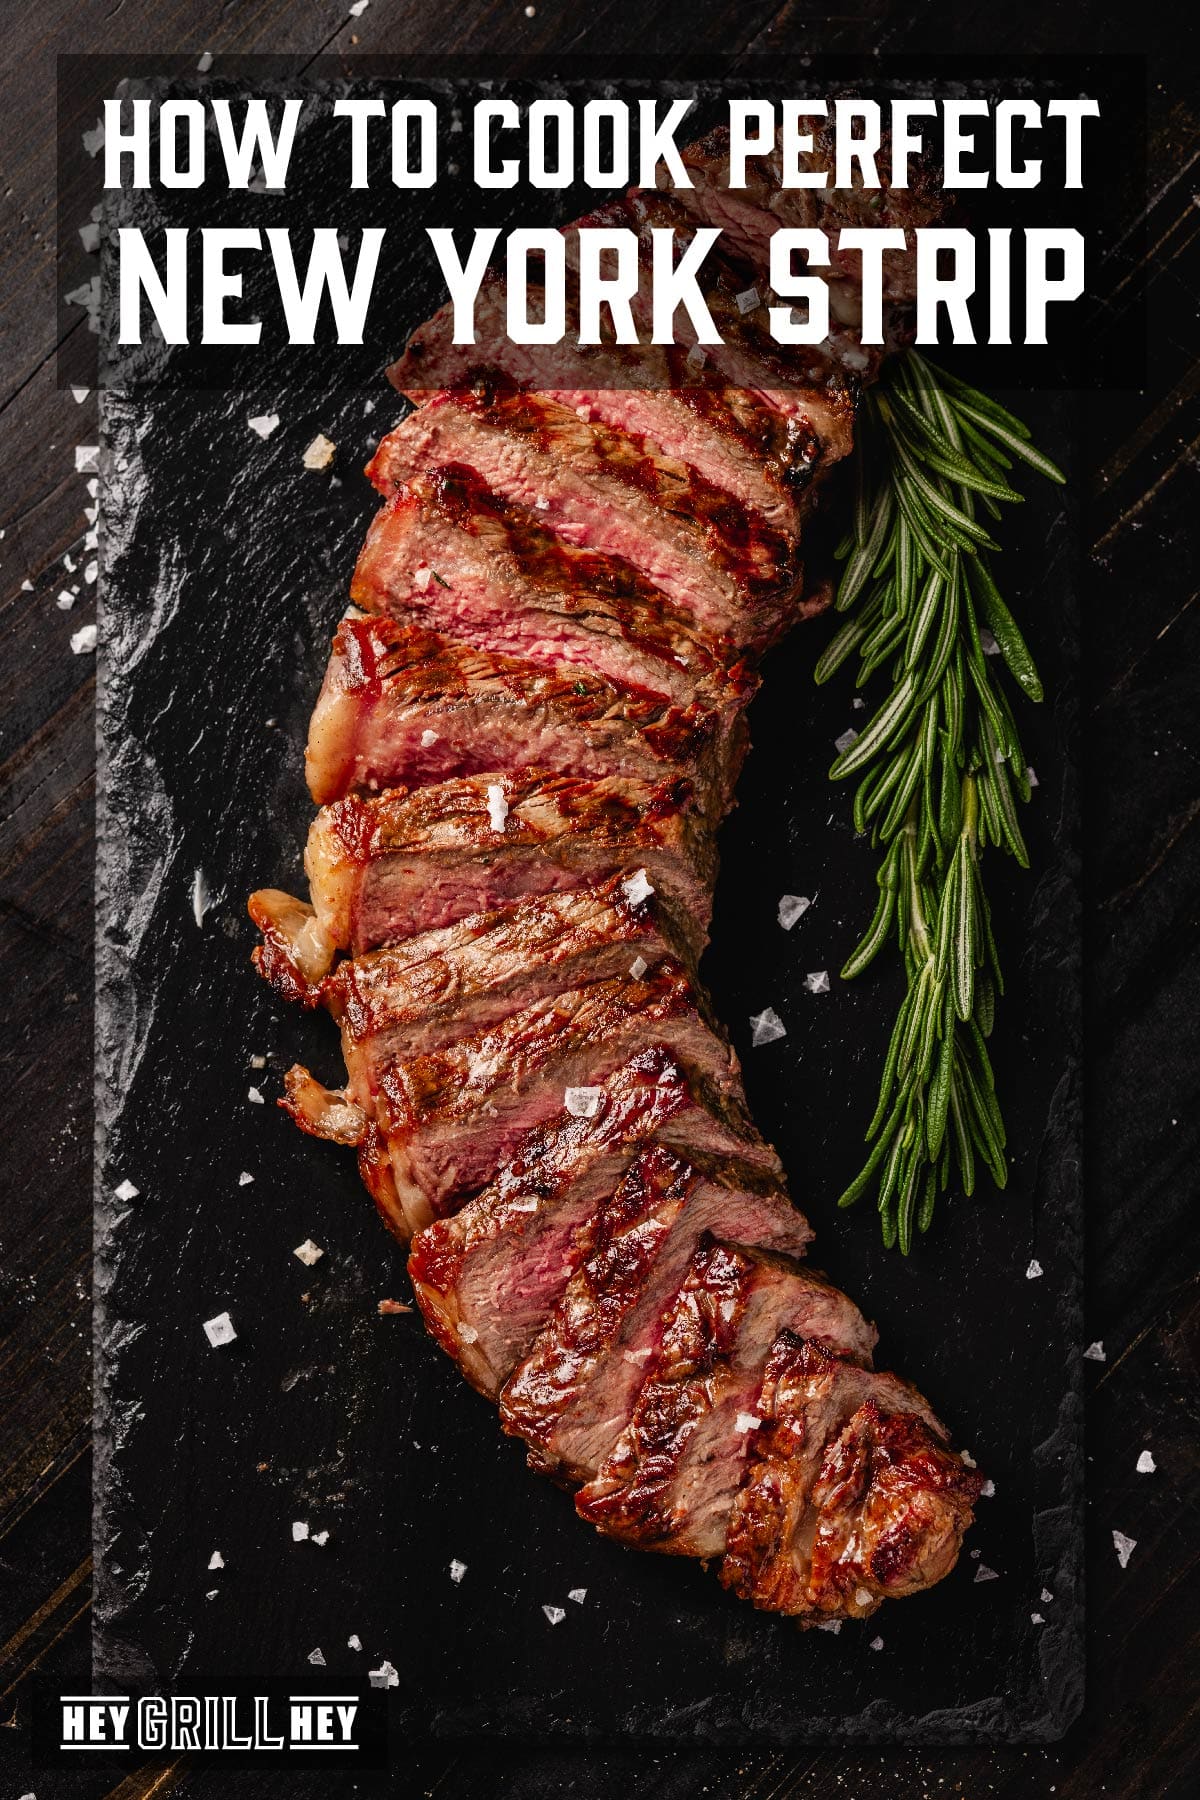 Sliced steak on black serving platter. Text reads "How to Cook Perfect New York Stip".